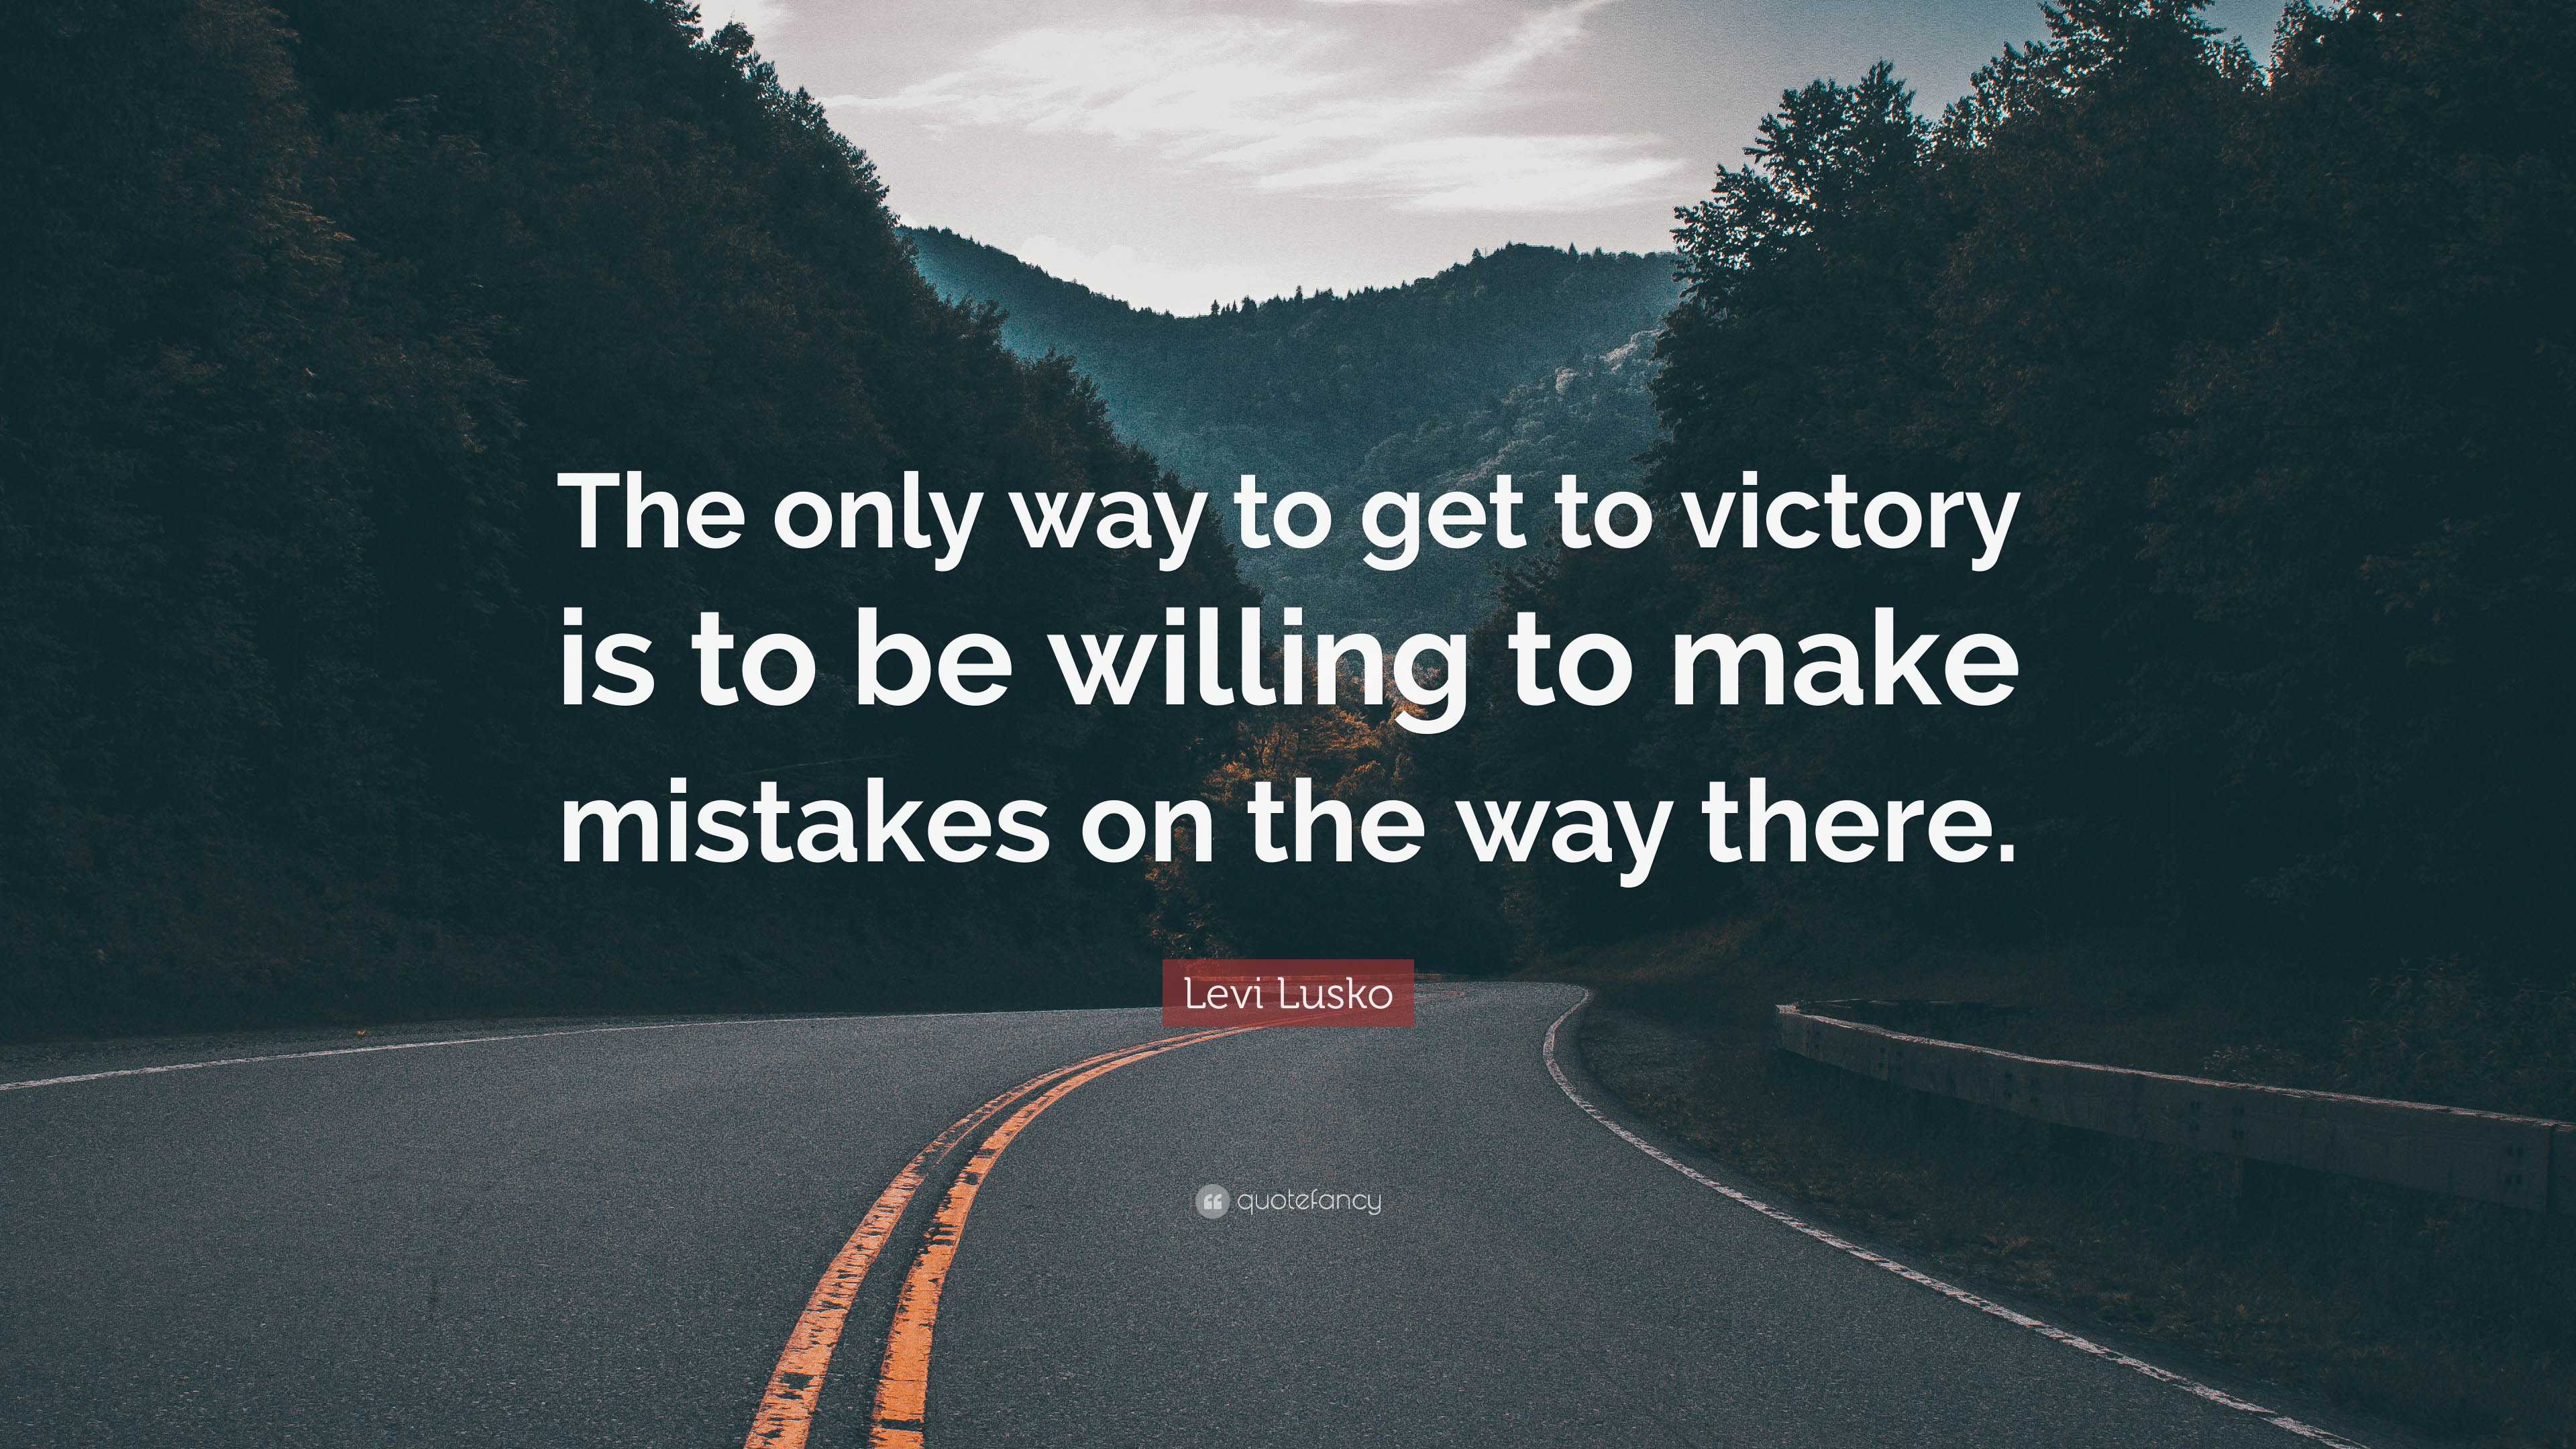 Levi Lusko Quote: “The only way to get to victory is to be willing to ...